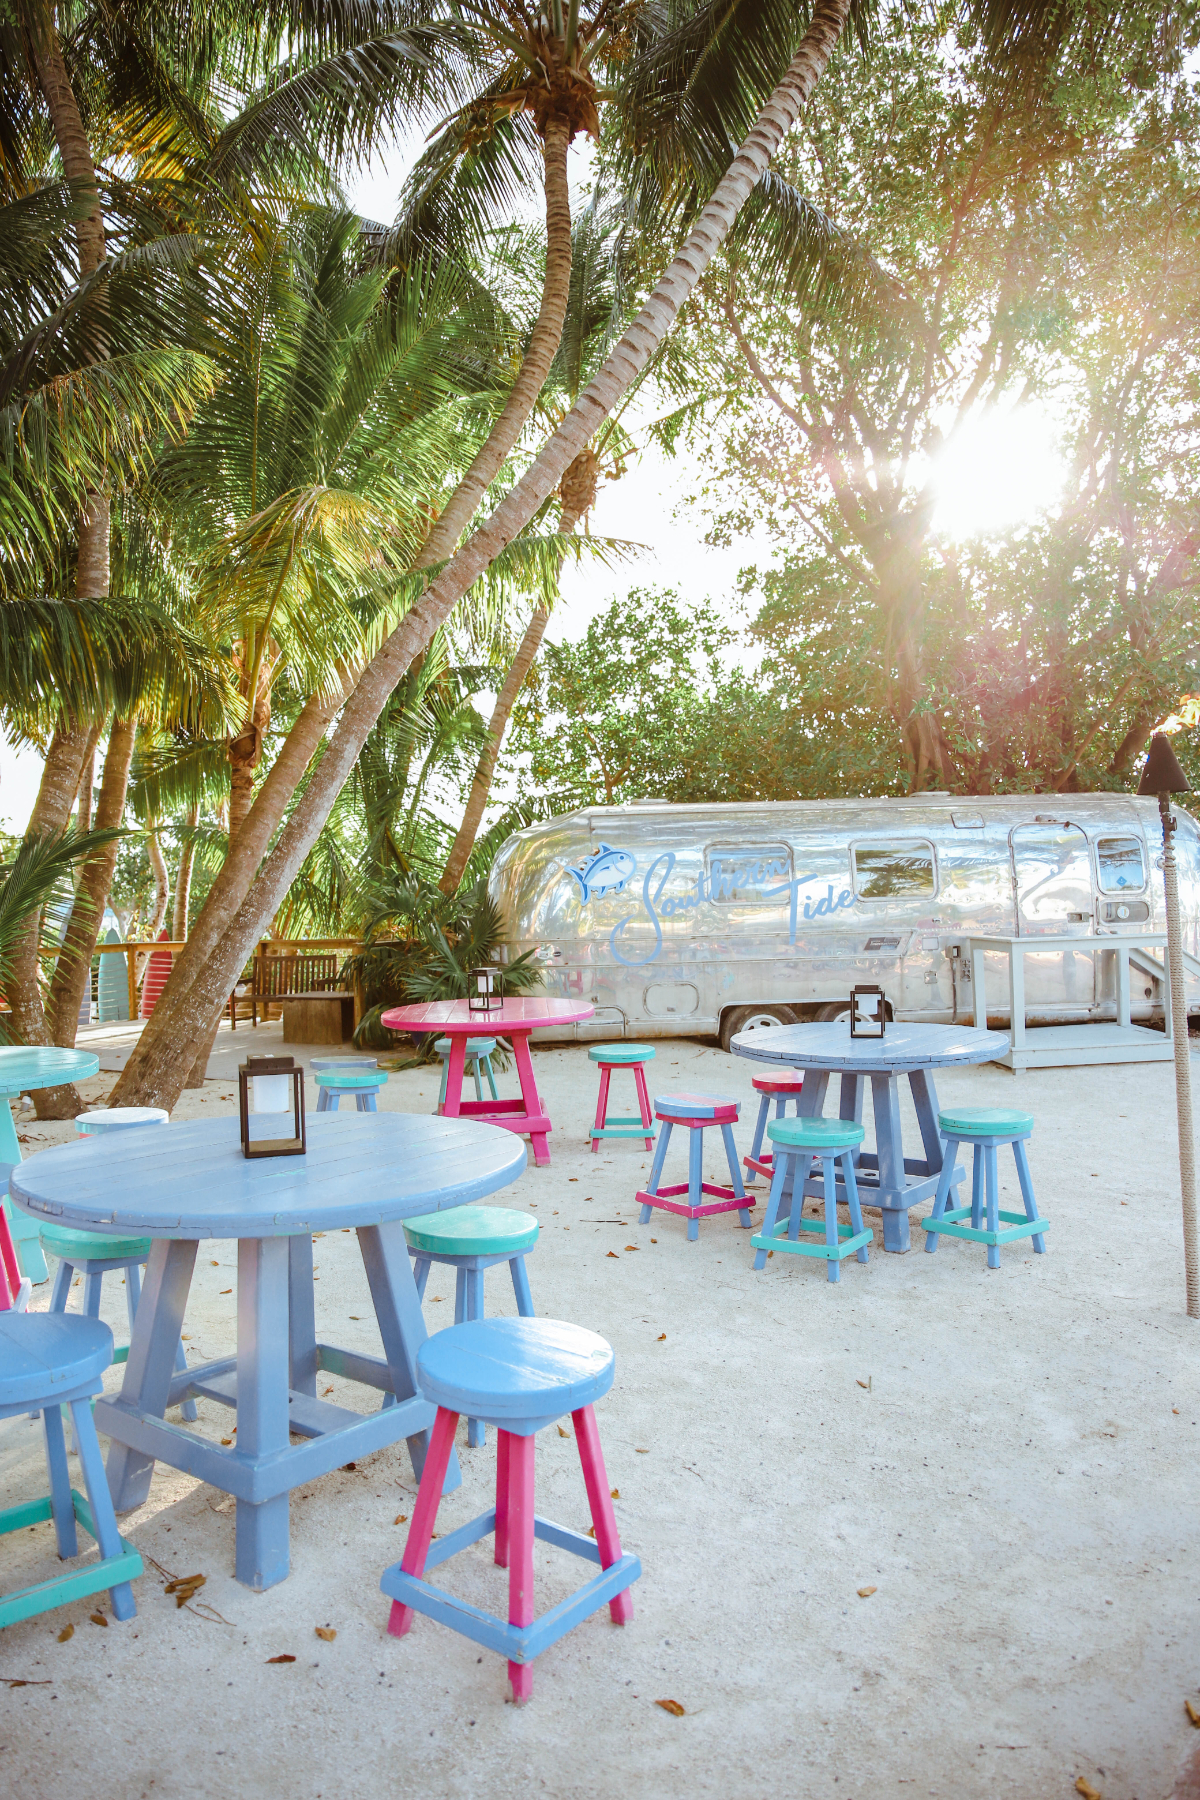 Wooden beach tables surround a metal food truck trailer and palm trees on a sandy area at Morada Bay Beach Cafe